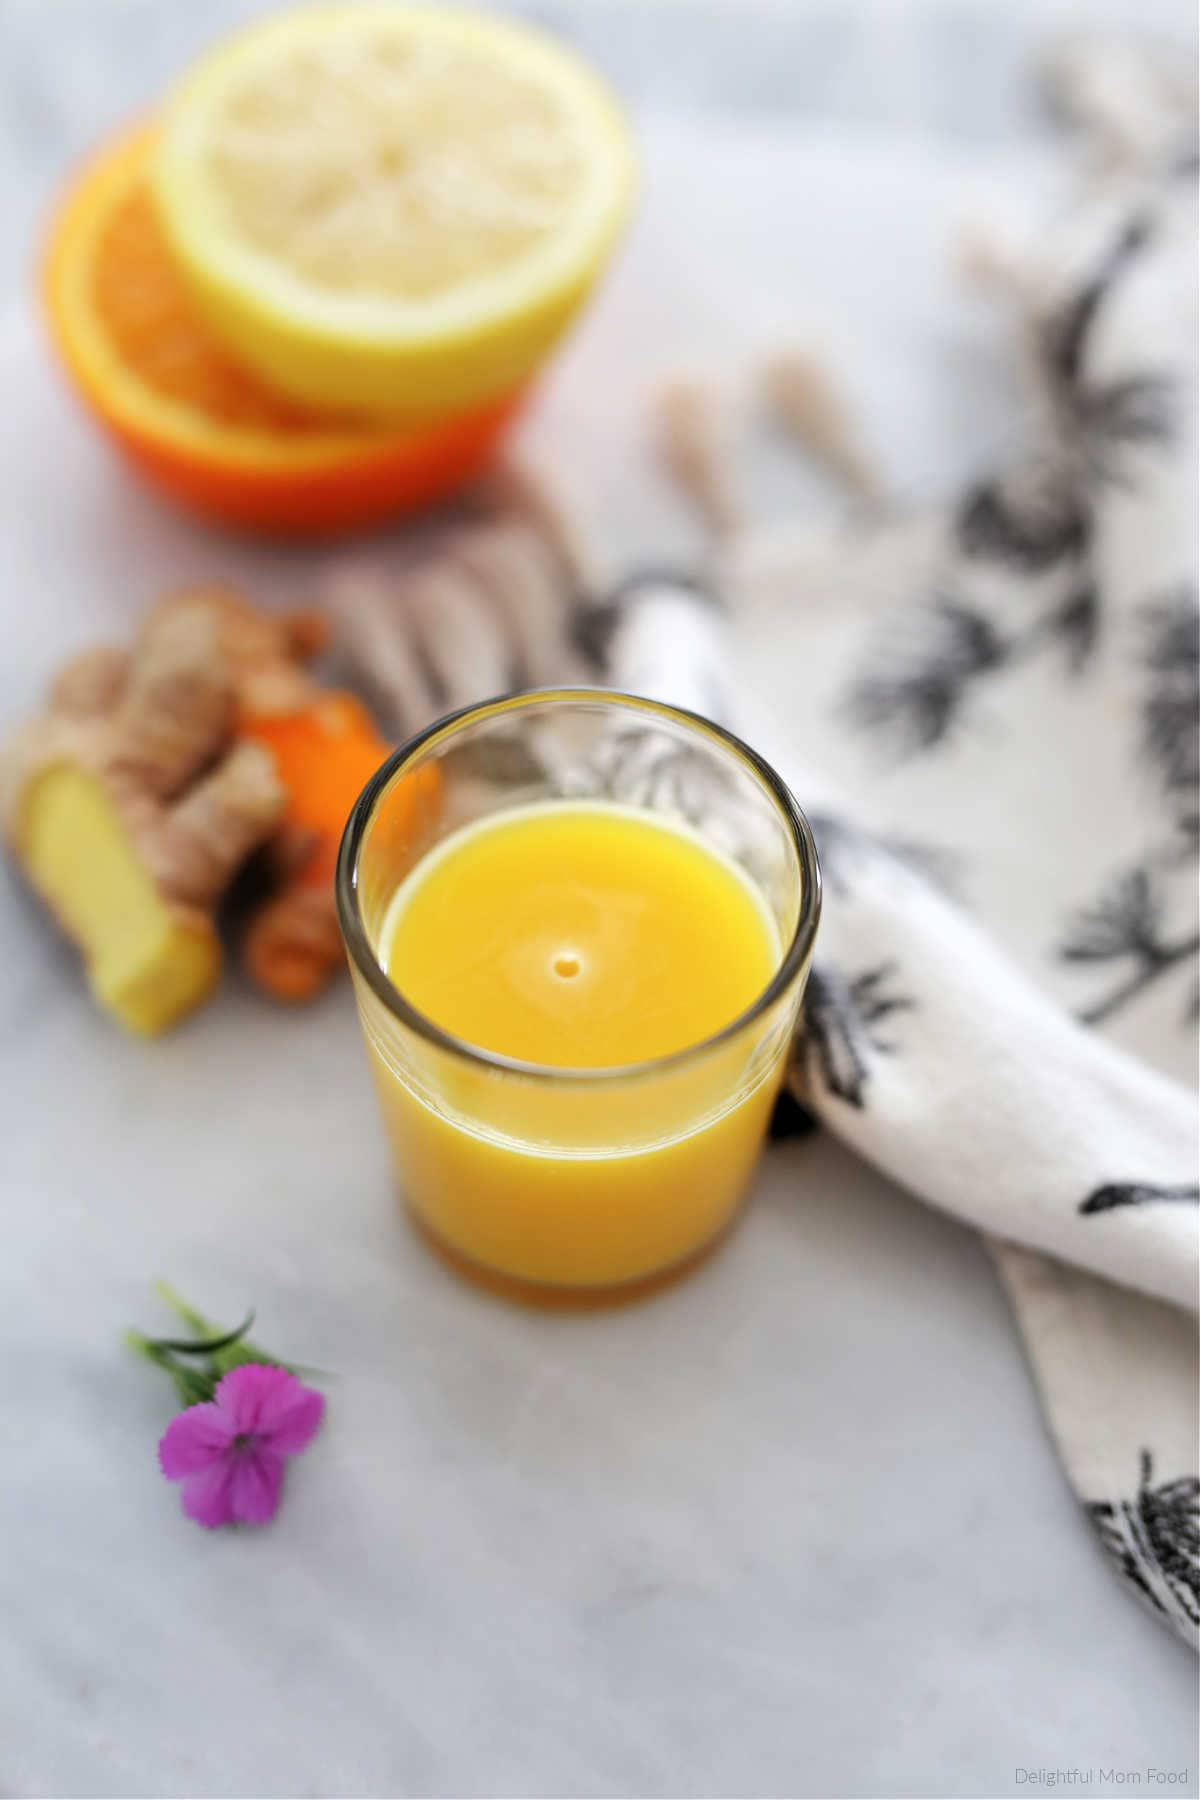 Ginger turmeric drink in a shot glass.